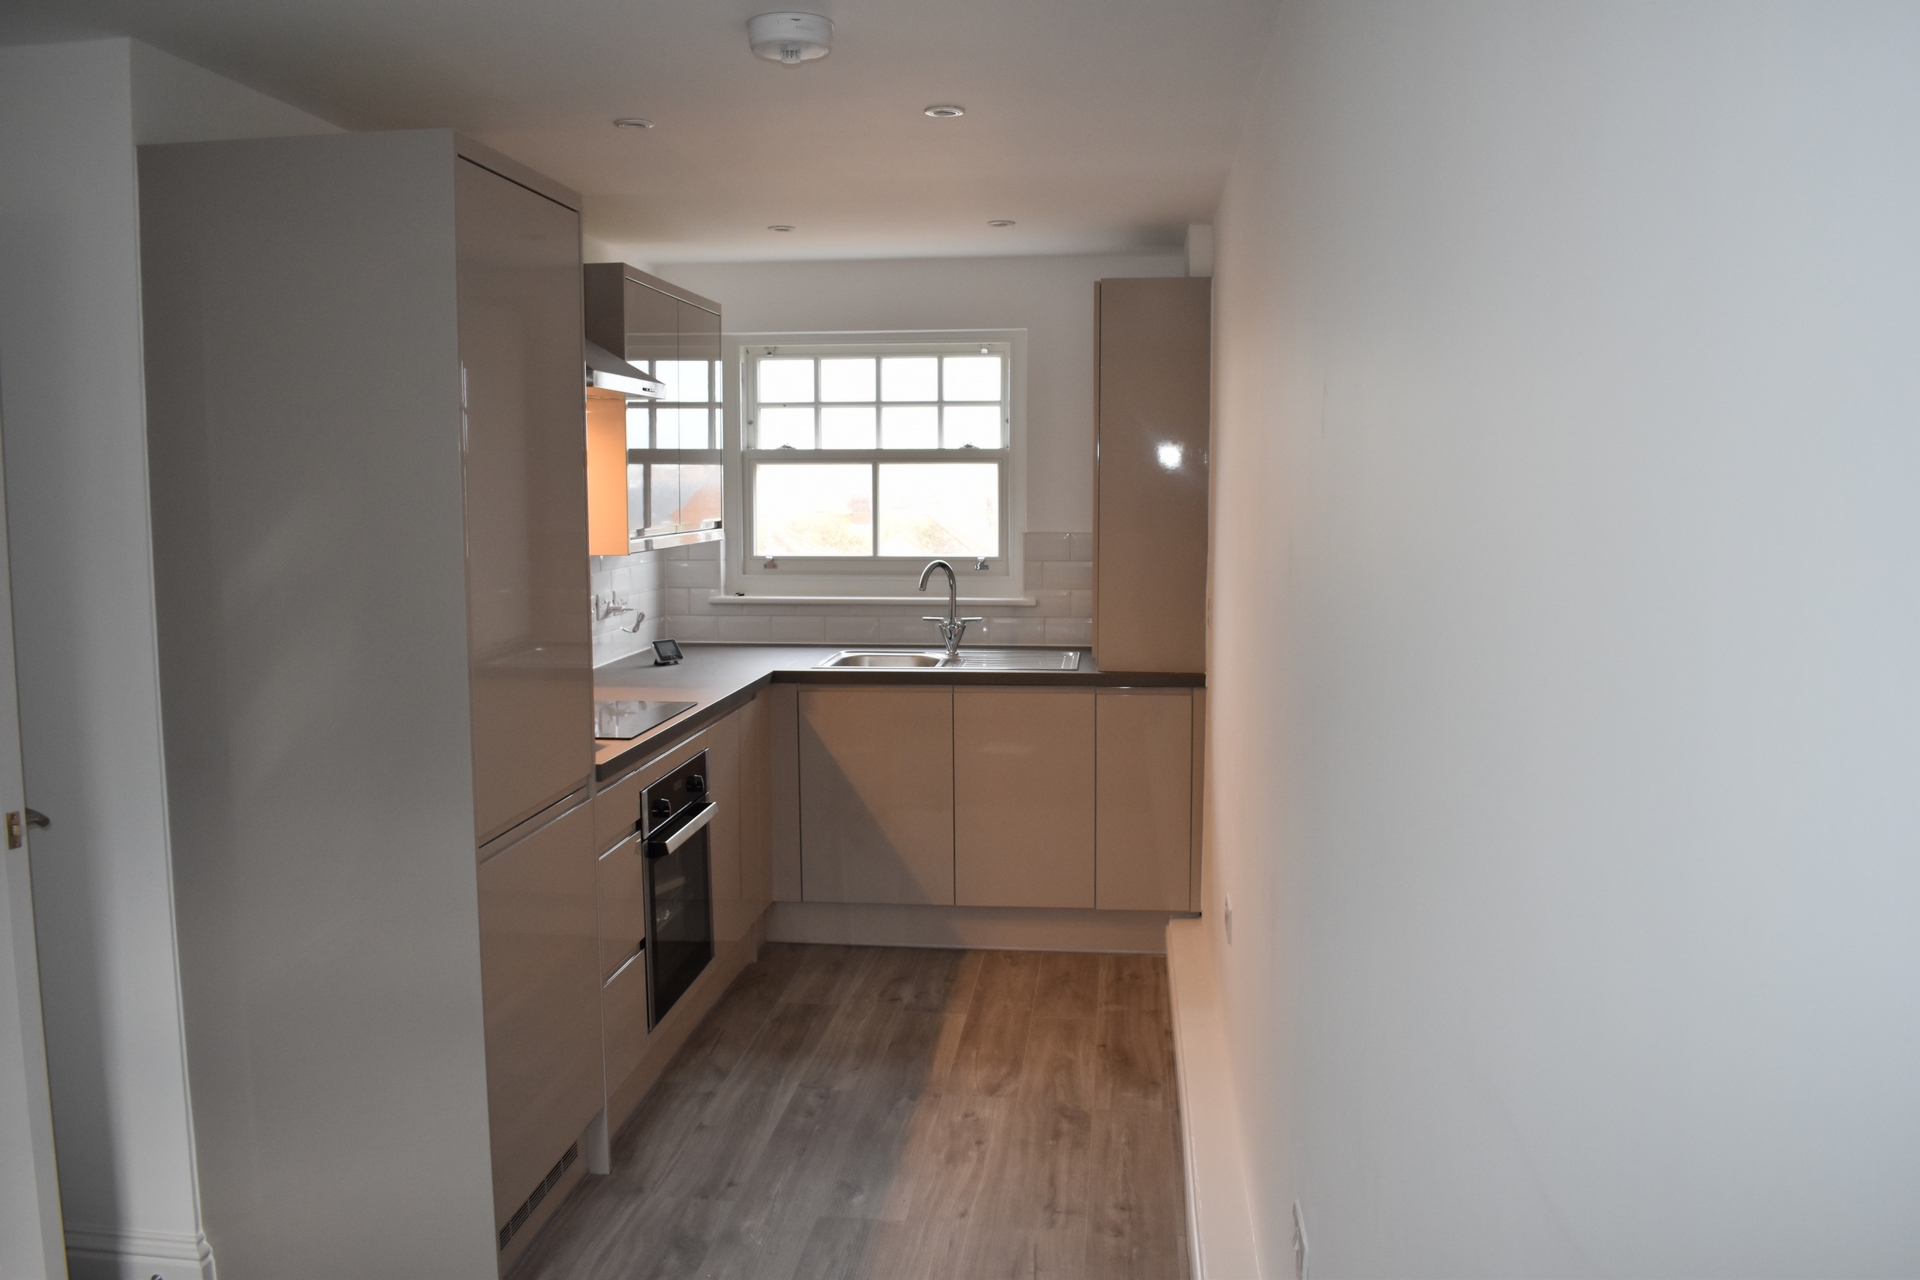 1 bed flat to rent in High Street, Broadstairs, CT10